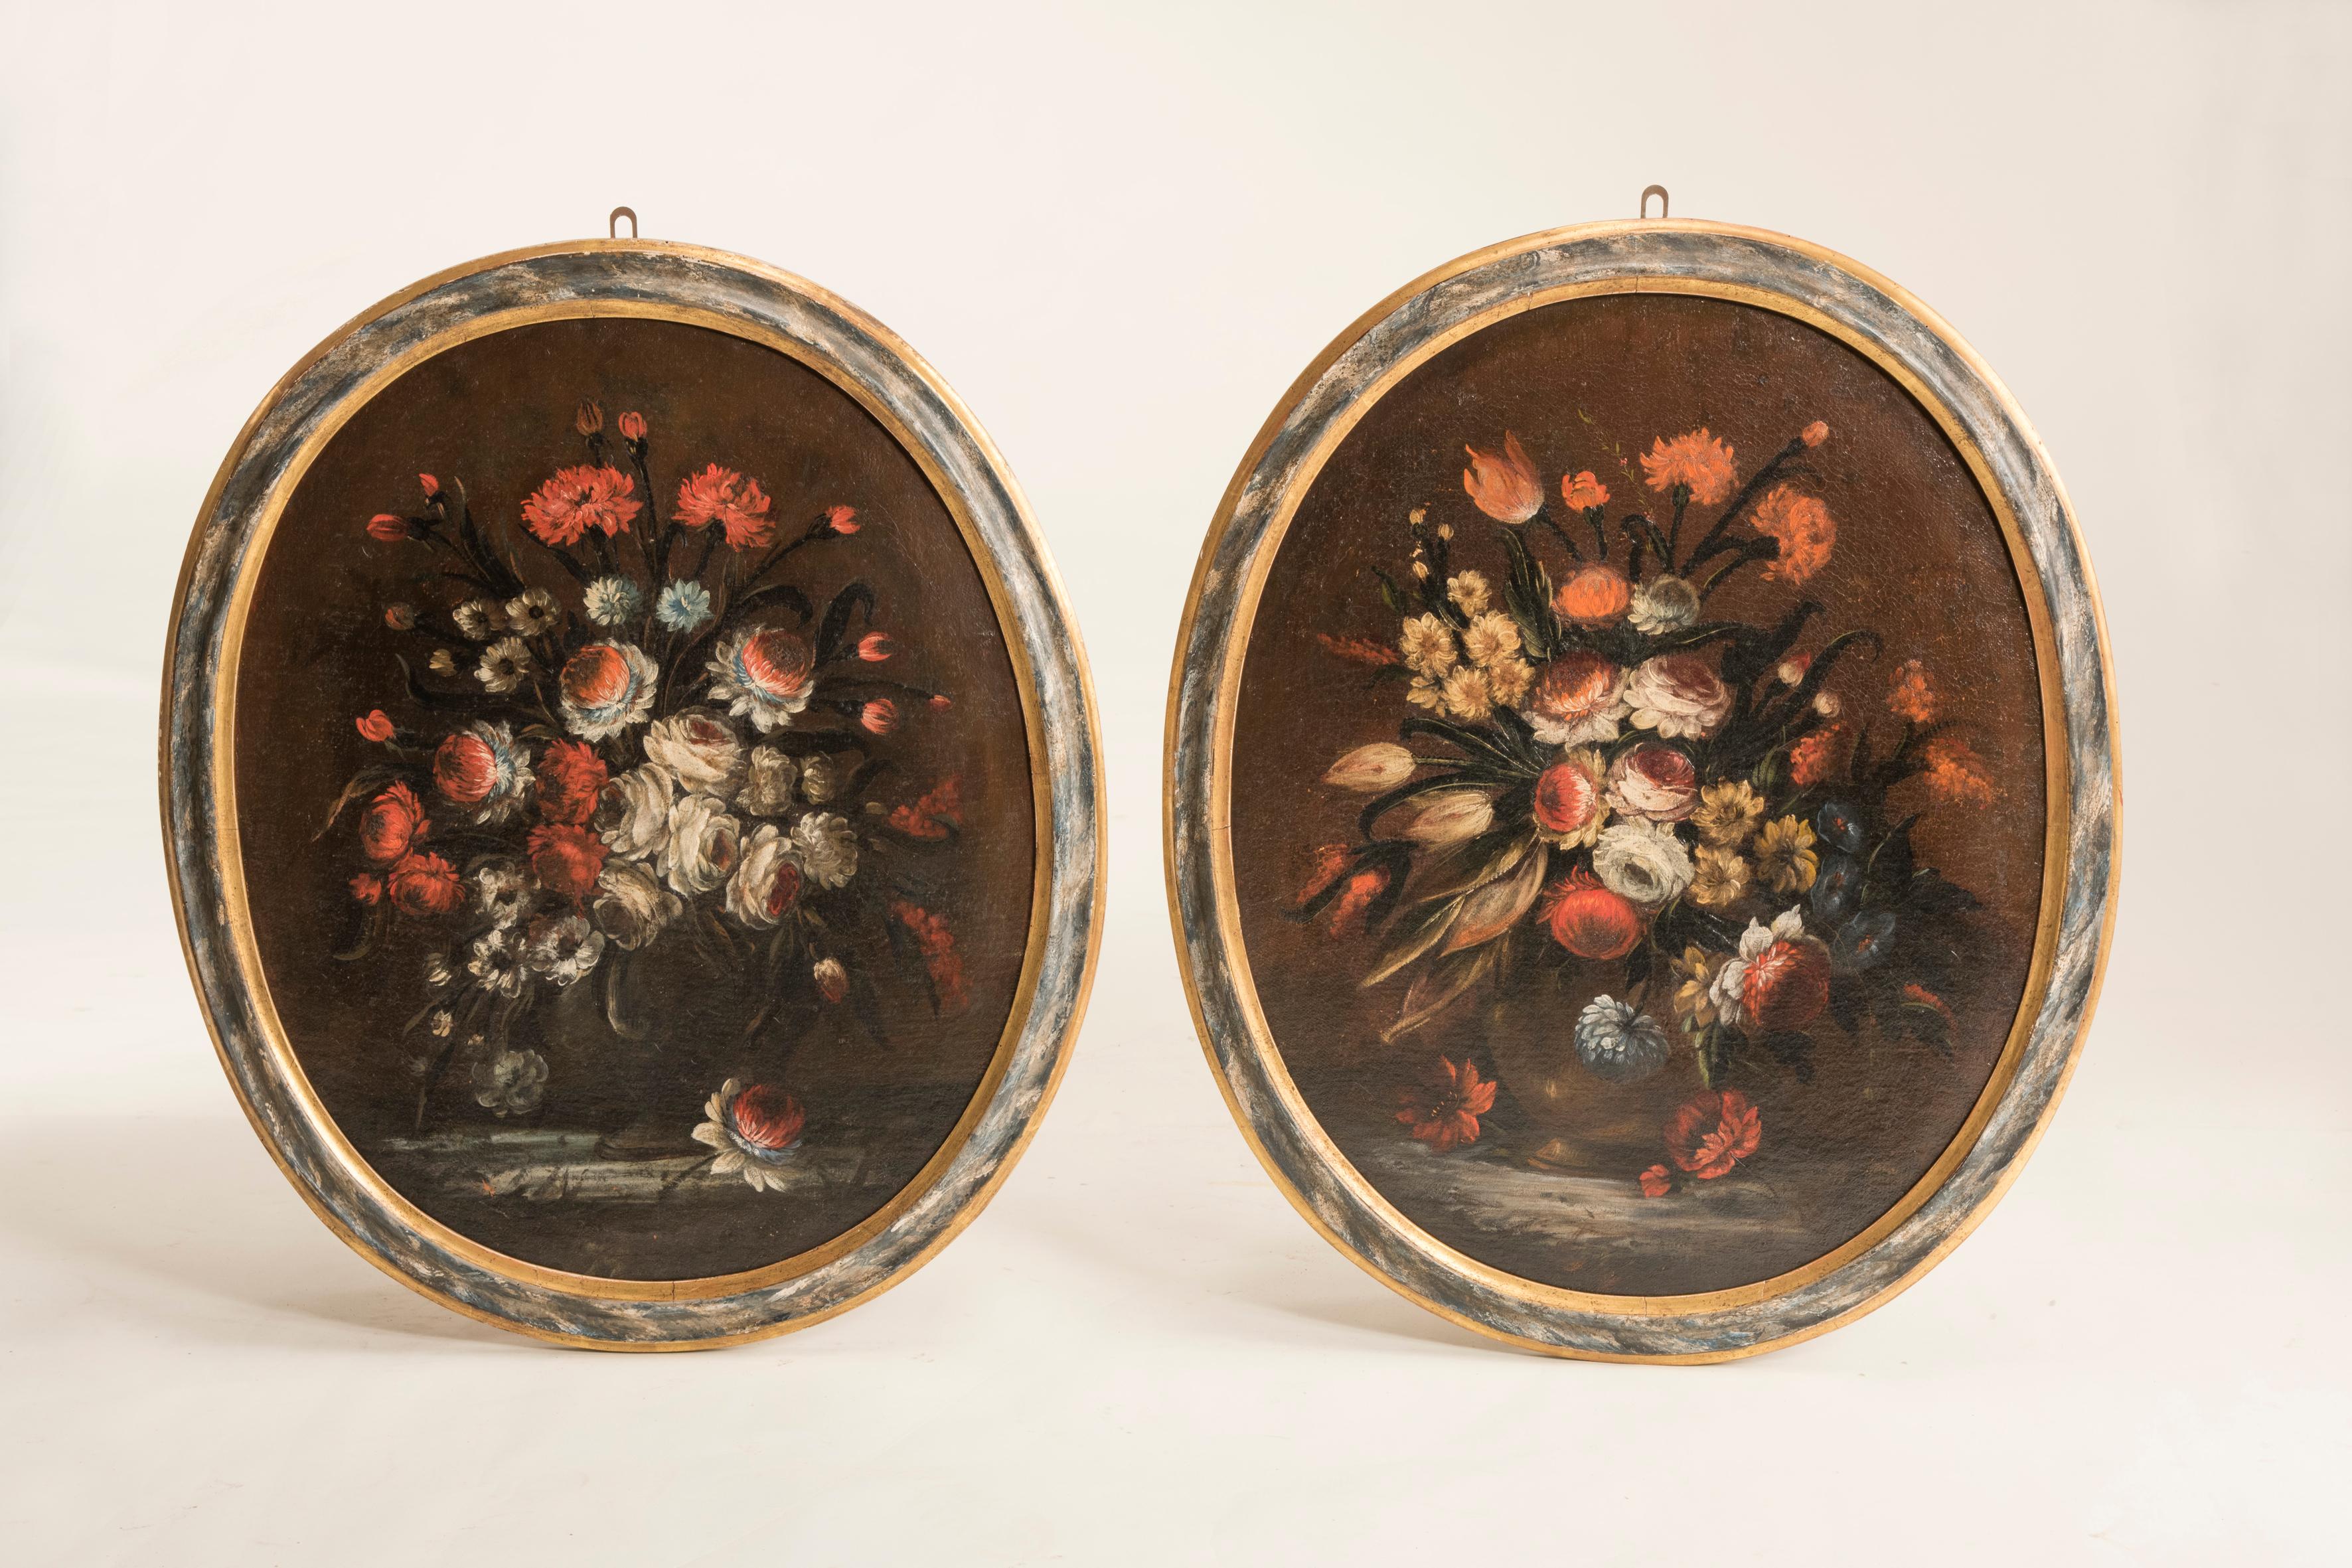 Late 17th-early 18th century Italian oval lacquered frames flower still life, set of two paintings.
Lacquered wooden Coeval frames.
Oil on canvas with dark background and finely defined flowers.
Restoration: cleaning and new canvas.
Size:
cm